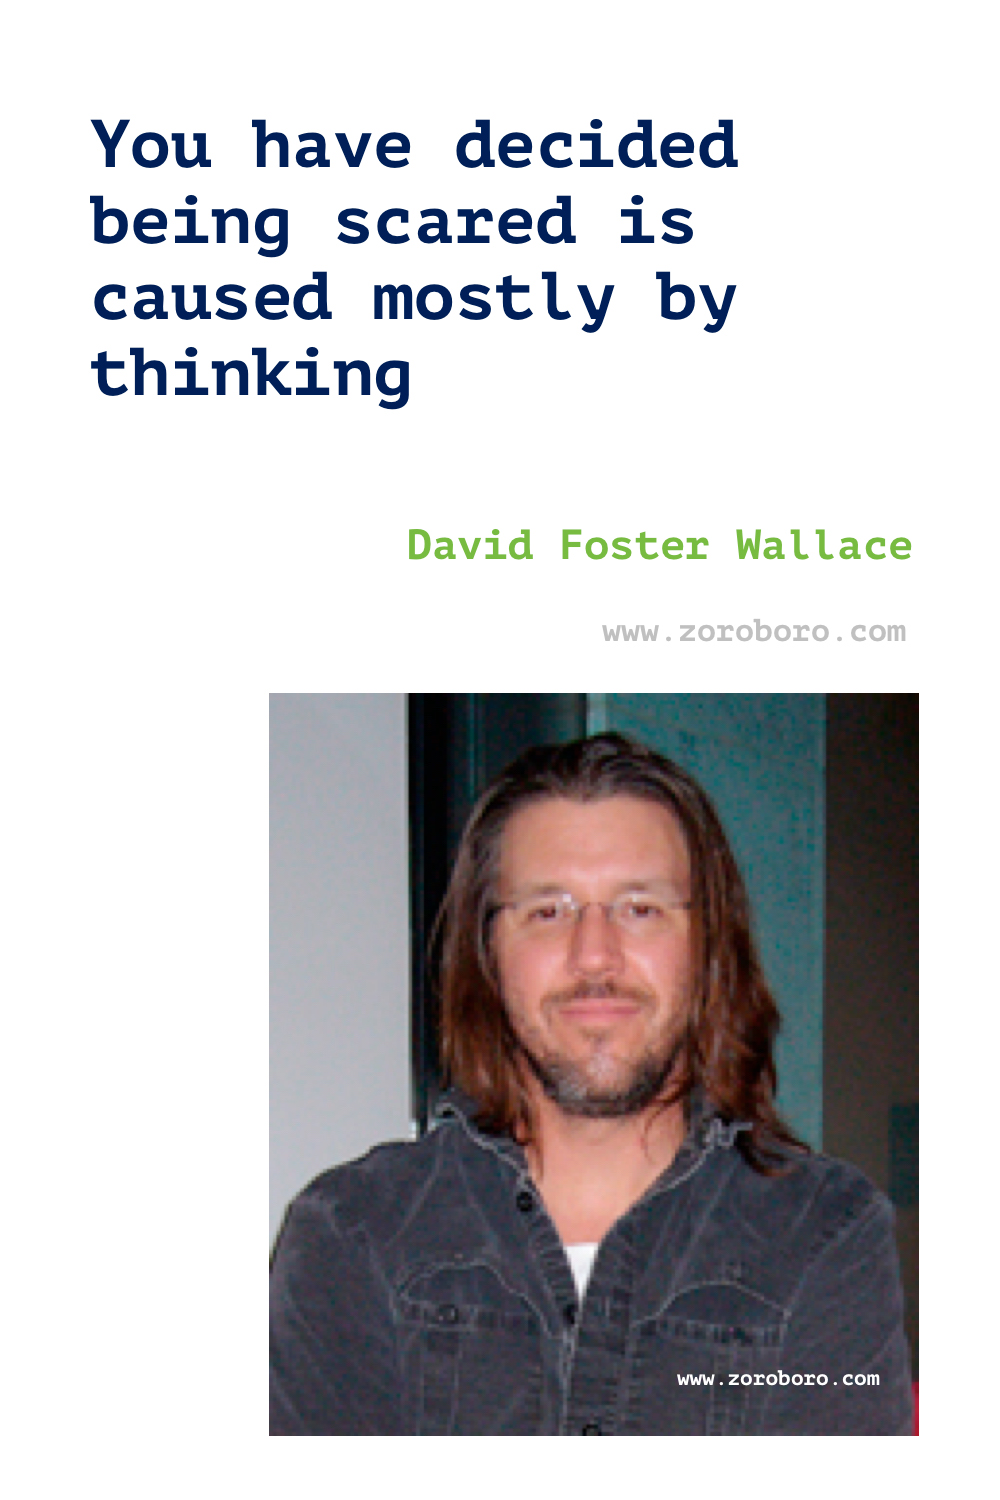 David Foster Wallace Quotes. David Foster Wallace Essays, Infinite Jest Quotes, This Is Water Quotes, David Foster Wallace Books Quotes, Movies, Stories. The Pale King. David Foster Wallace Quotes. Books, Giving, Infinite Jest Quotes, Loneliness Quotes, Worship Quotes, Writing Quotes.